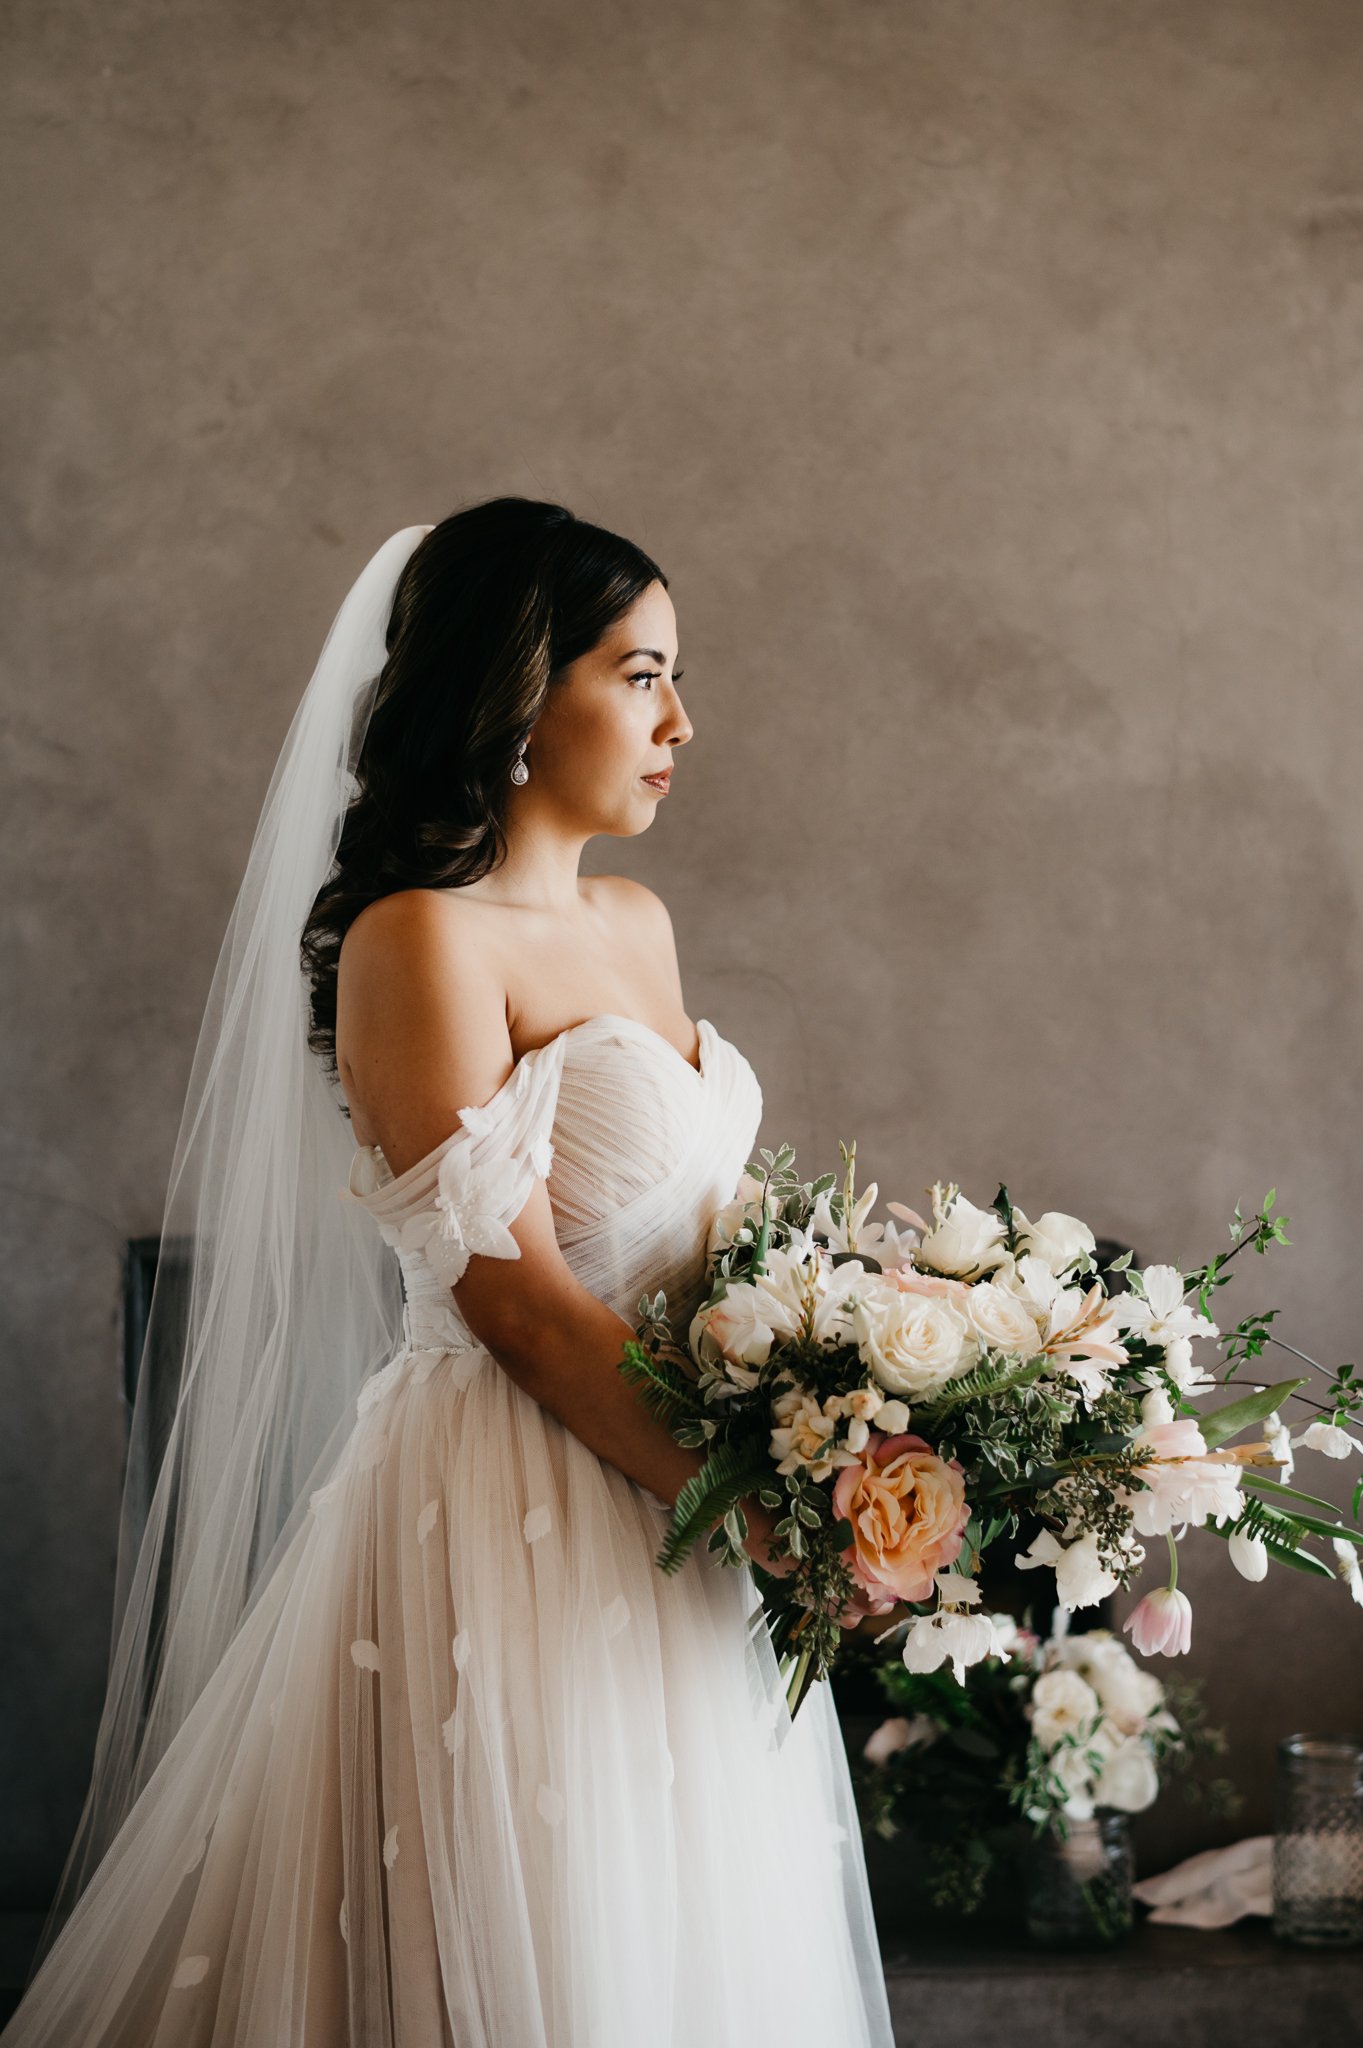 Bride in wedding dress with veil and floral bouquet staring off in distance before wedding ceremony